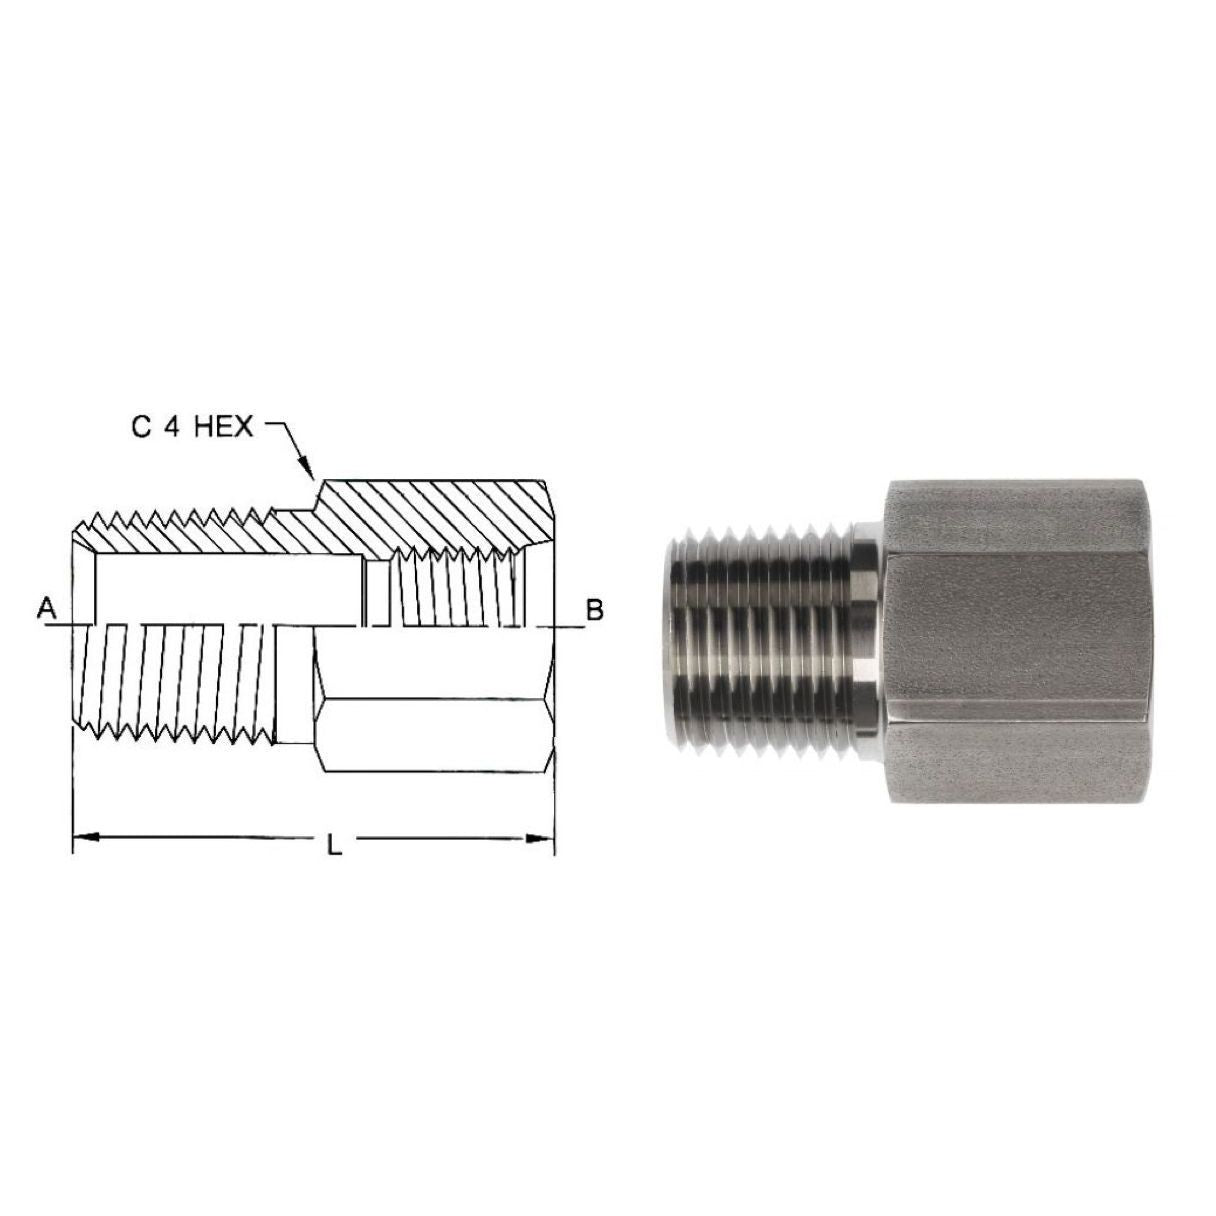 6404-08-06 : OneHydraulics Adapter, Straight, 0.5 (1/2") Female ORB x 0.375 (3/8") Male, Steel, 5000psi